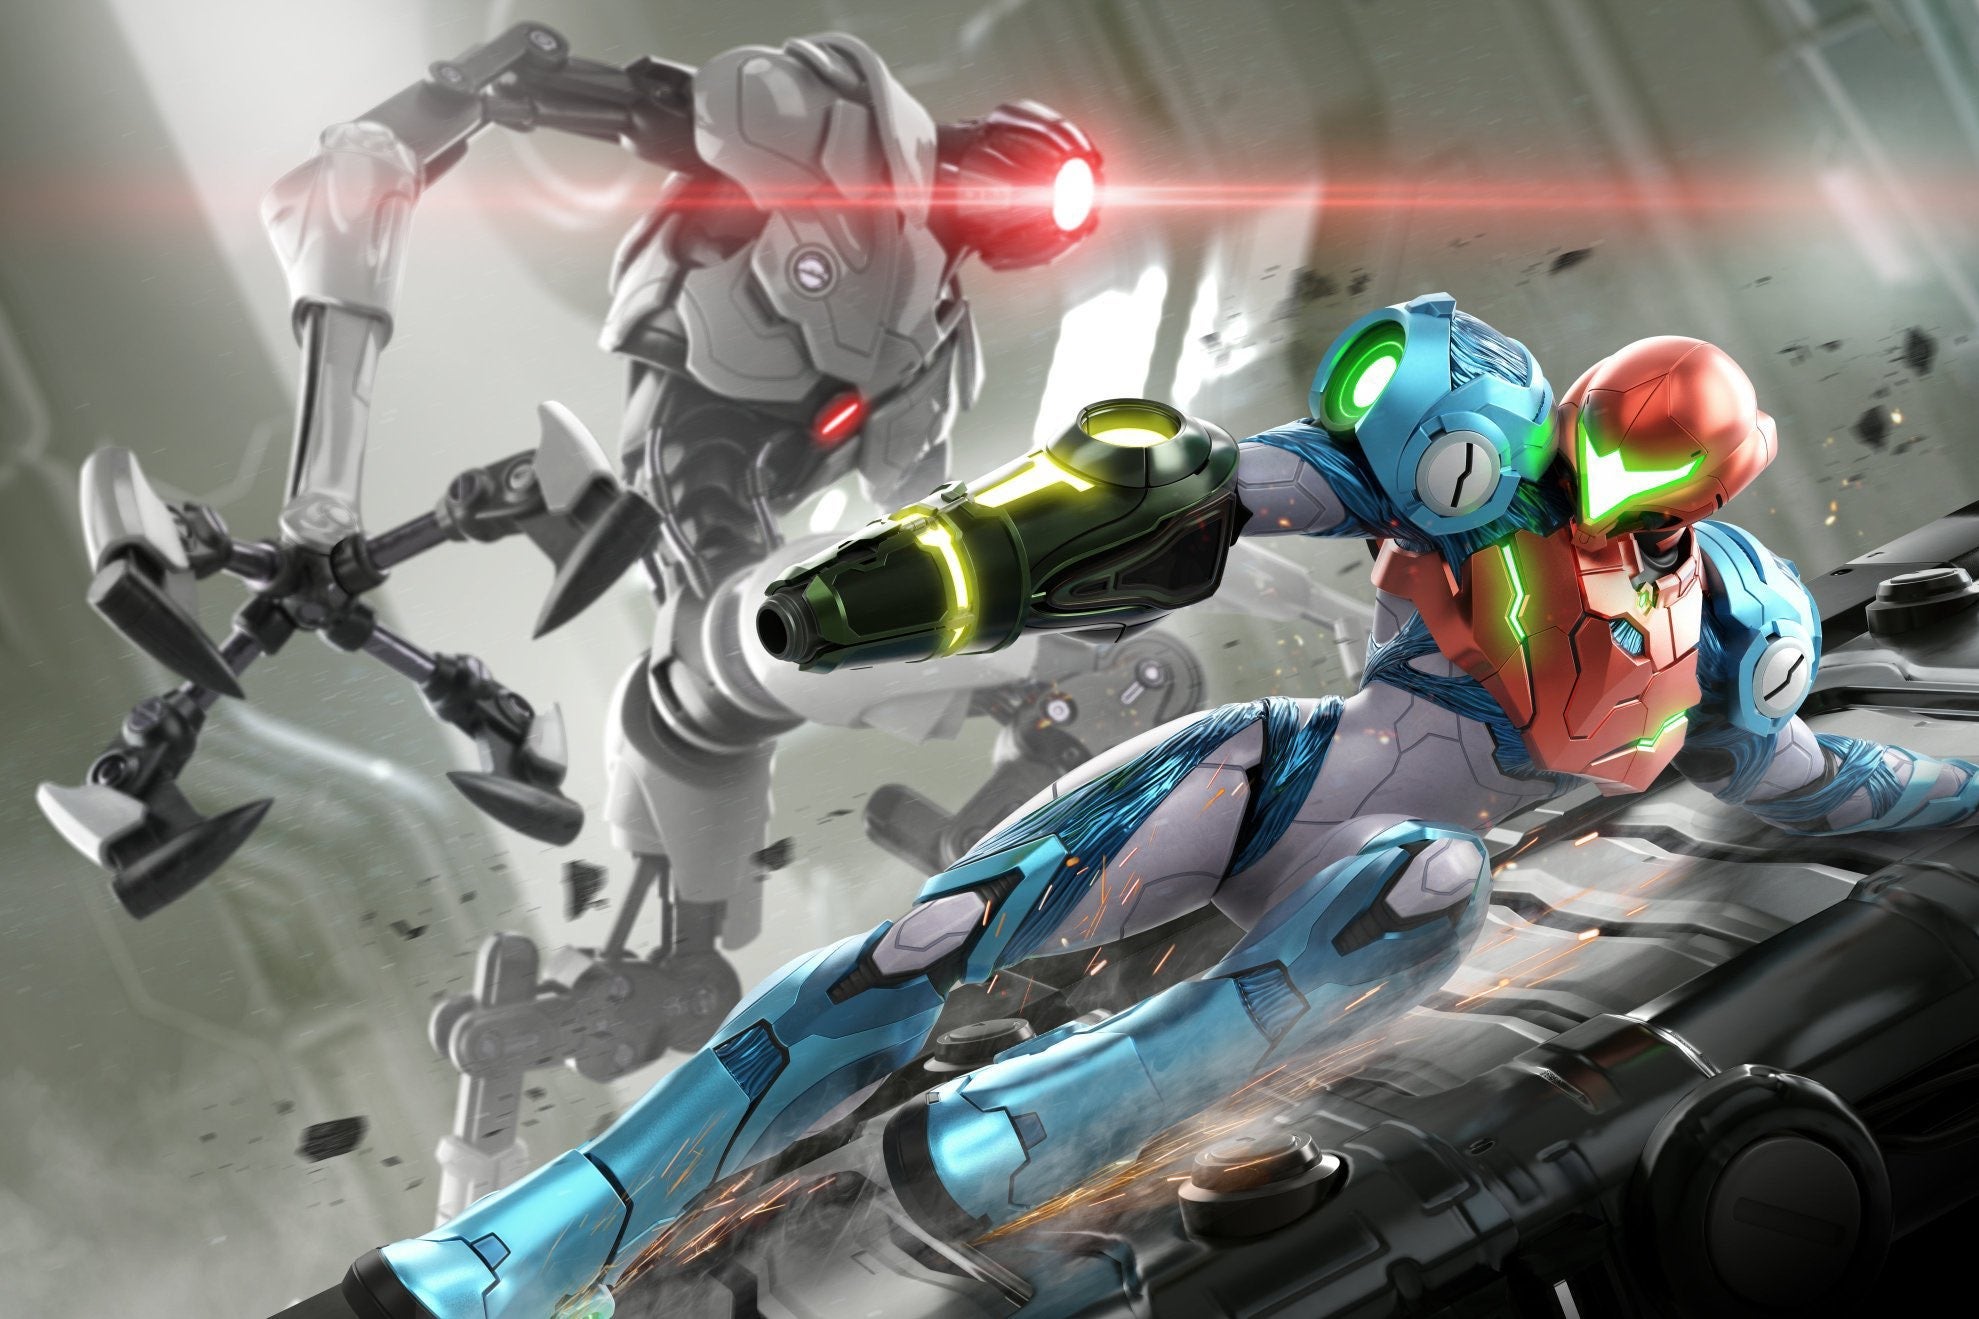 A woman in a blue-and-gray space suit with a red helmet slides across a metal platform. A robotic monster with a white body and metallic black arms leers at her with its single red laser eye.